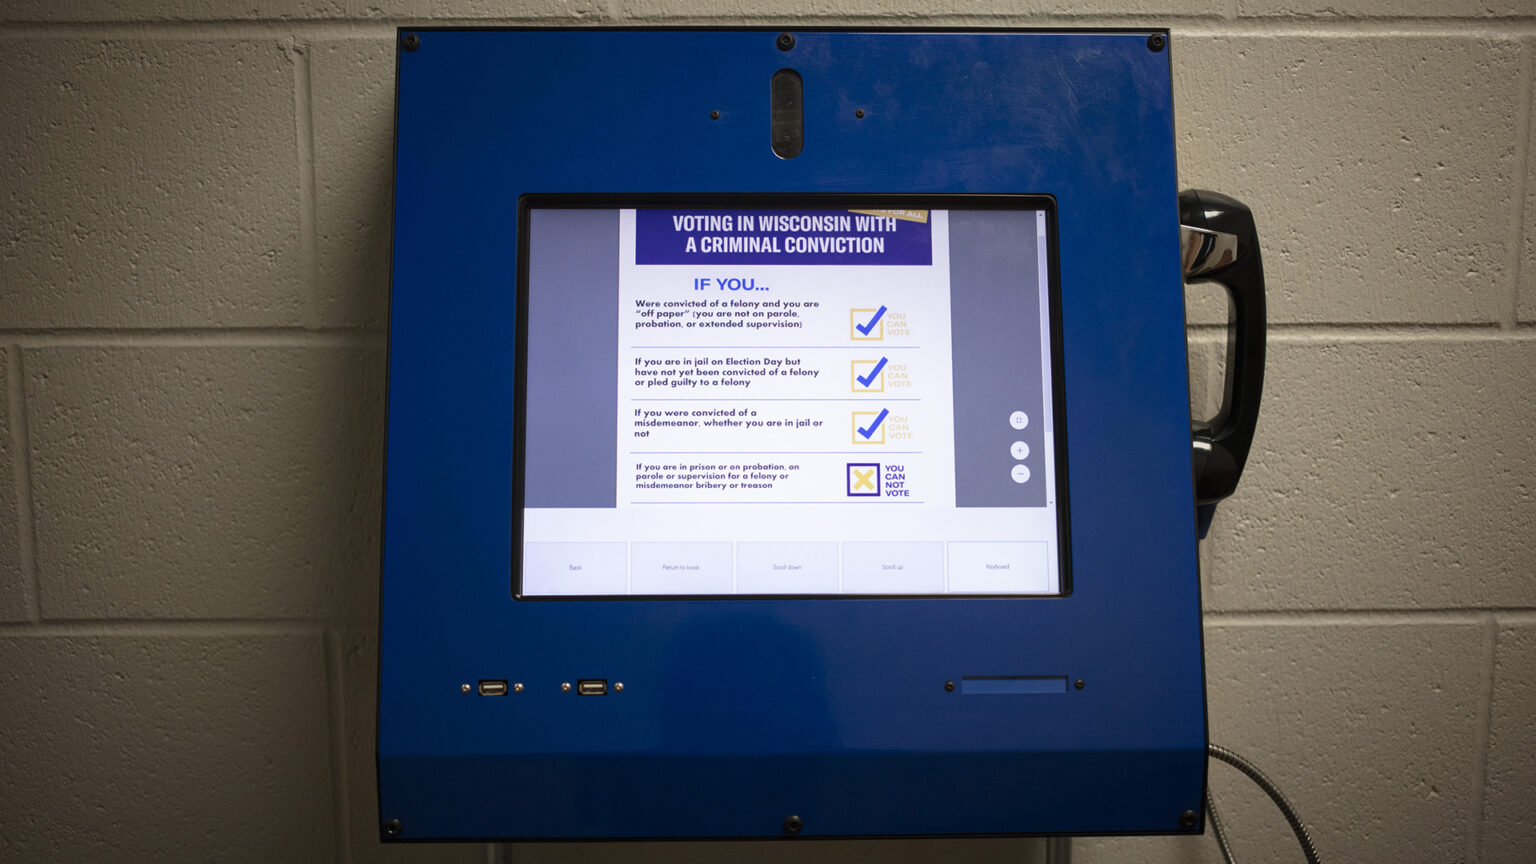 A metal box with a touchscreen and connected telephone handset shows information about Voting in Wisconsin with a Criminal Conviction.